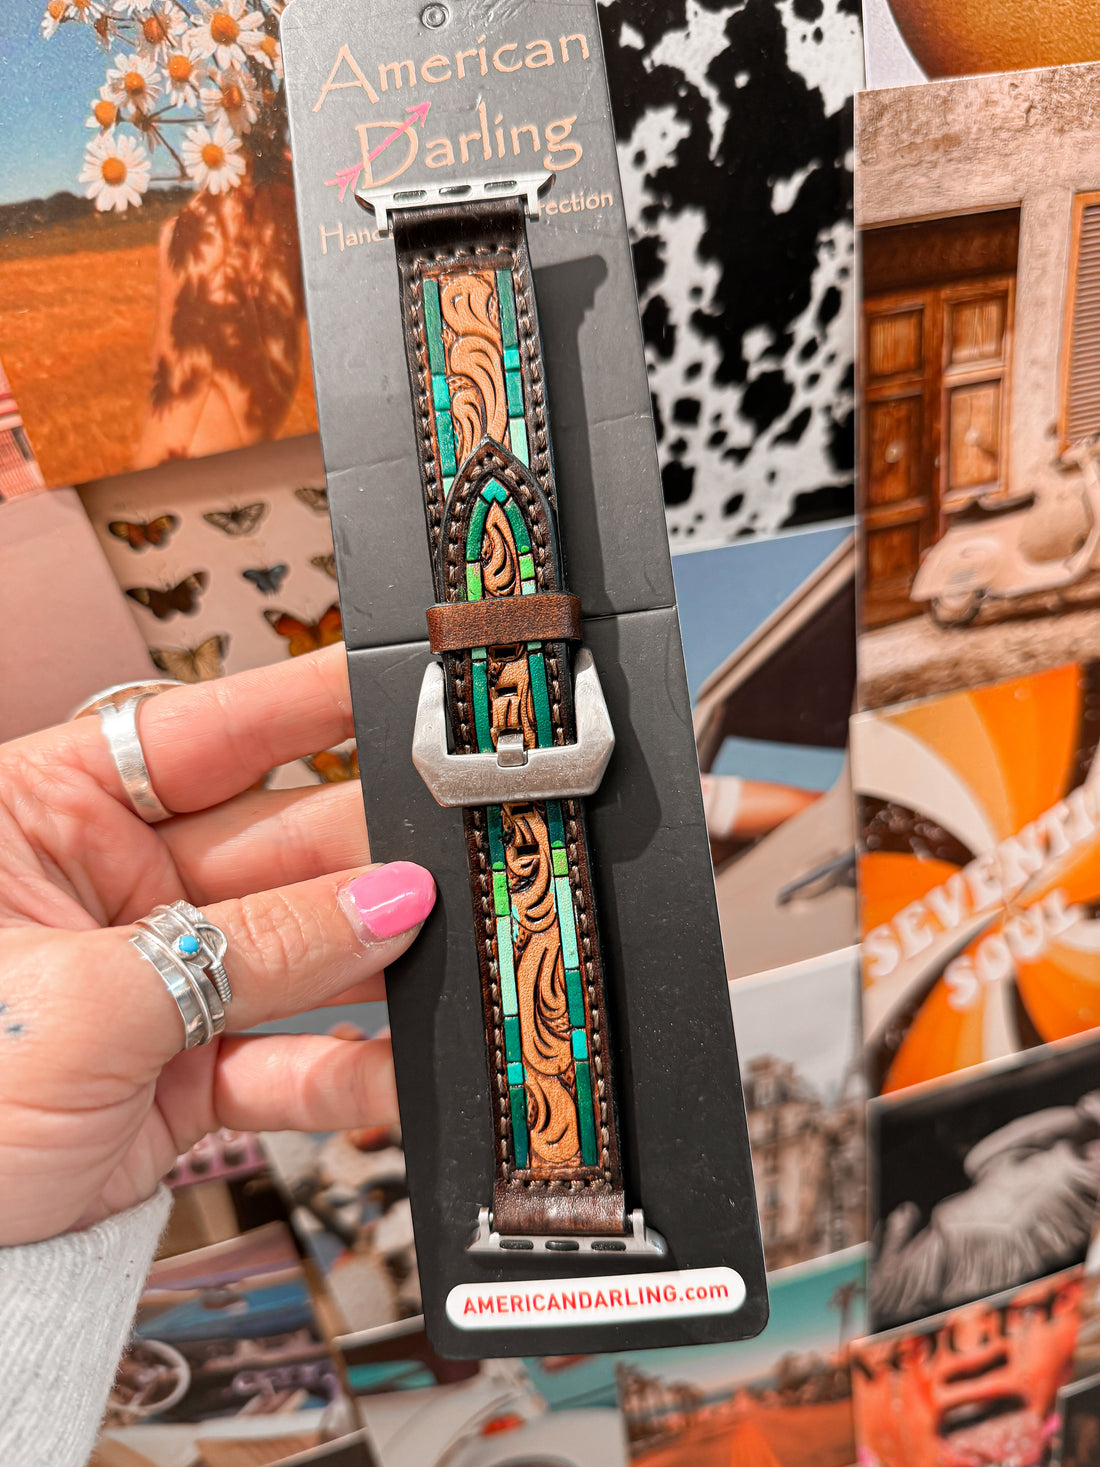 Brand American Darling   Brown Tooled Leather with a Turquoise and Green Detailing    The Metal is Sliver color   The Buckle is about 1 1/2" wide  Main Strap is a little less then 1"  Apple Watch Band Only   Size Is 38mm-41mm